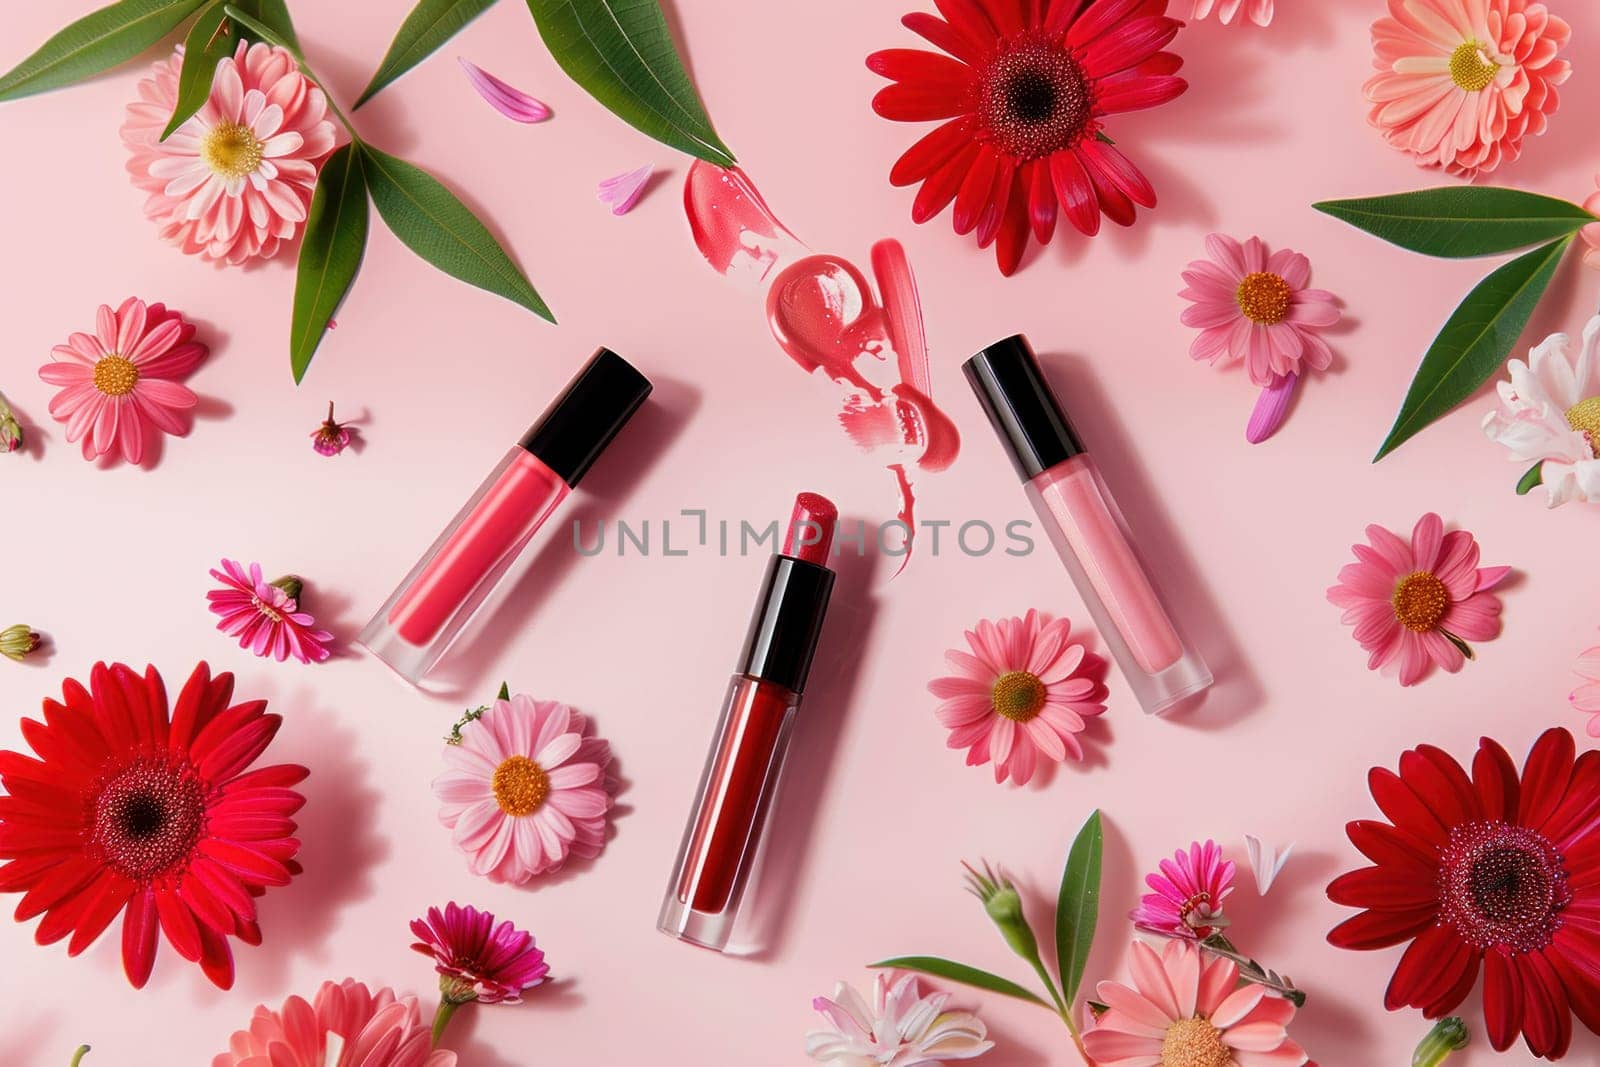 Beauty and fashion essentials displayed on pink background with flowers and liquid lipstick, top view flat lay concept